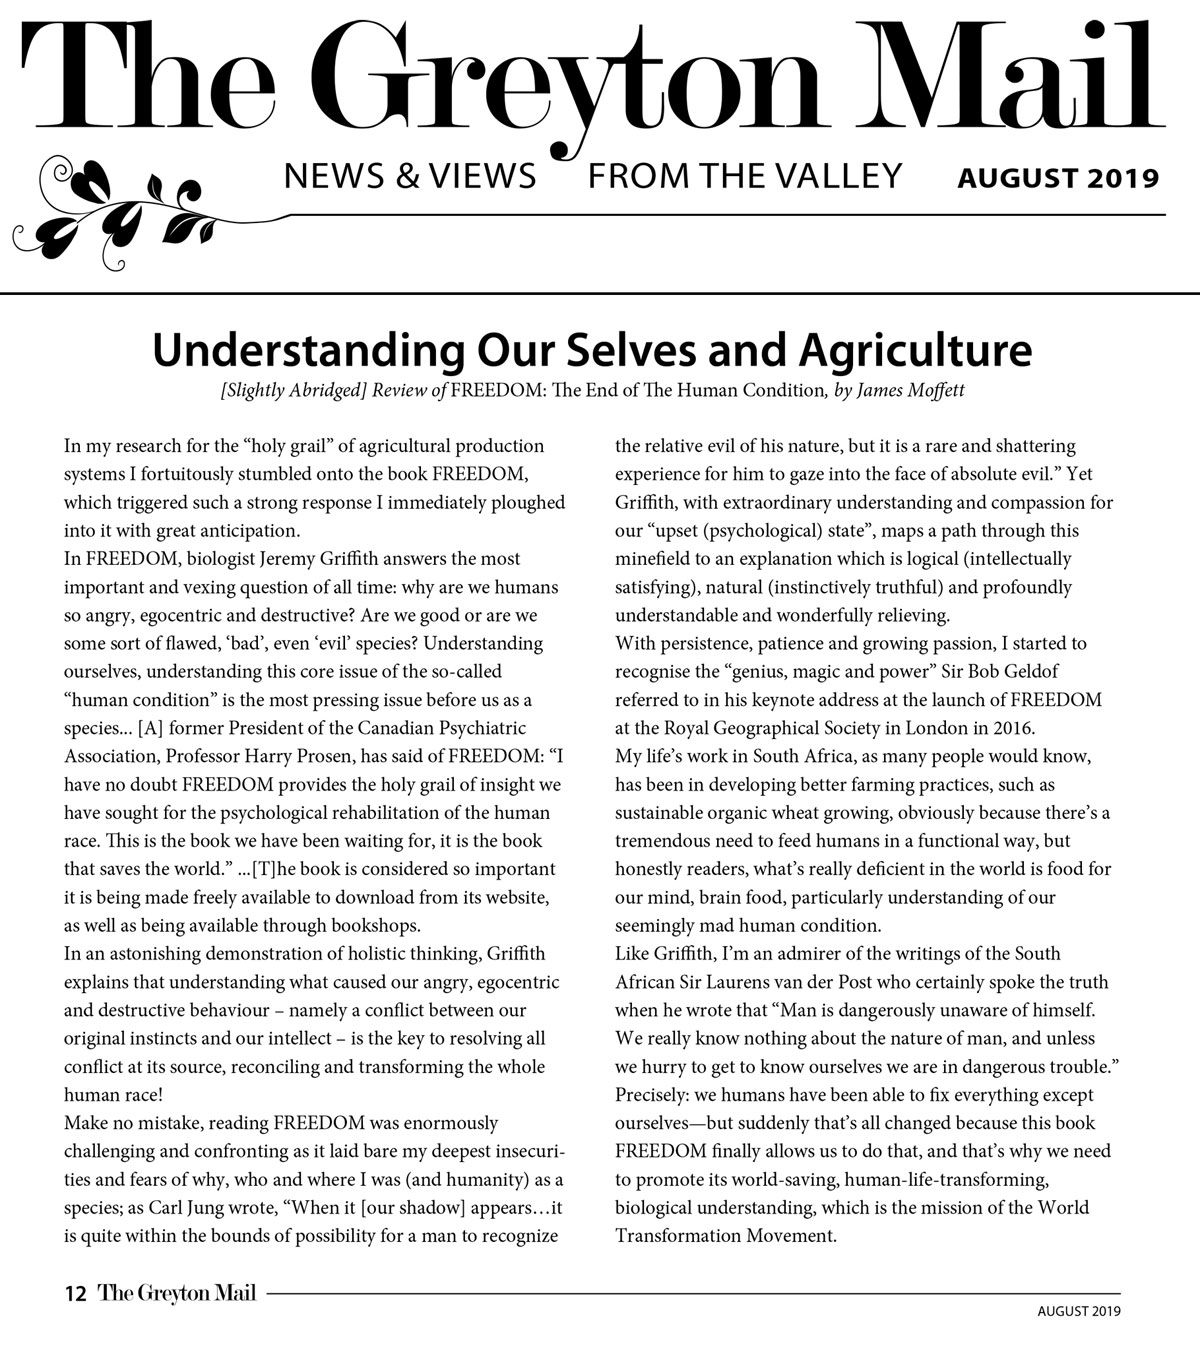 Greyton Mail Review article titled Understanding Our Selves and Agriculture by James Moffett